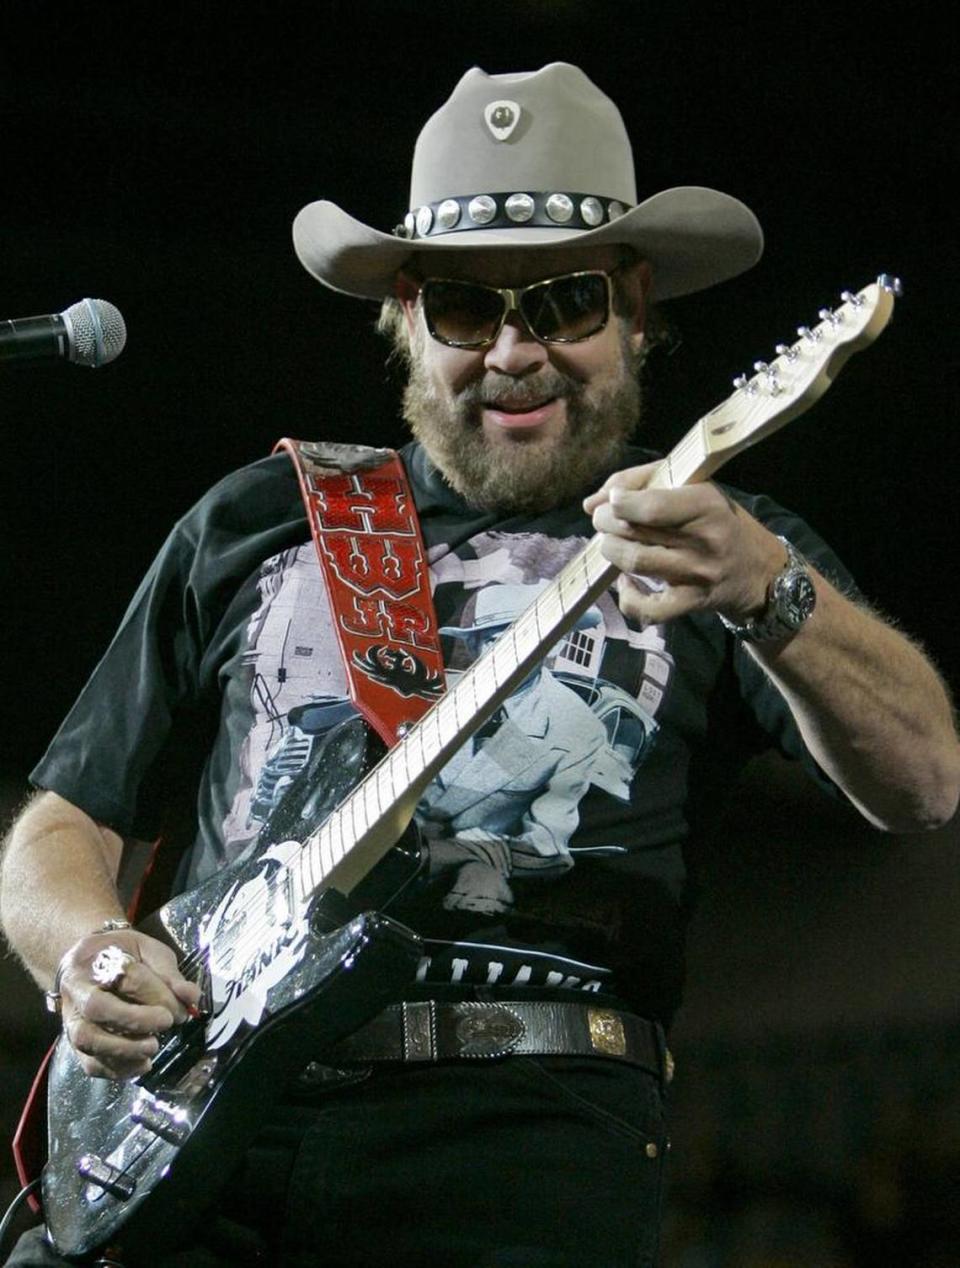 Hank Williams Jr., one of country music’s greatest stars — who managed to find his own niche while holding onto the memory of his late father Hank Williams — is shown here performing in 2009. He will play at the Ford Idaho Center Amphitheater in July.